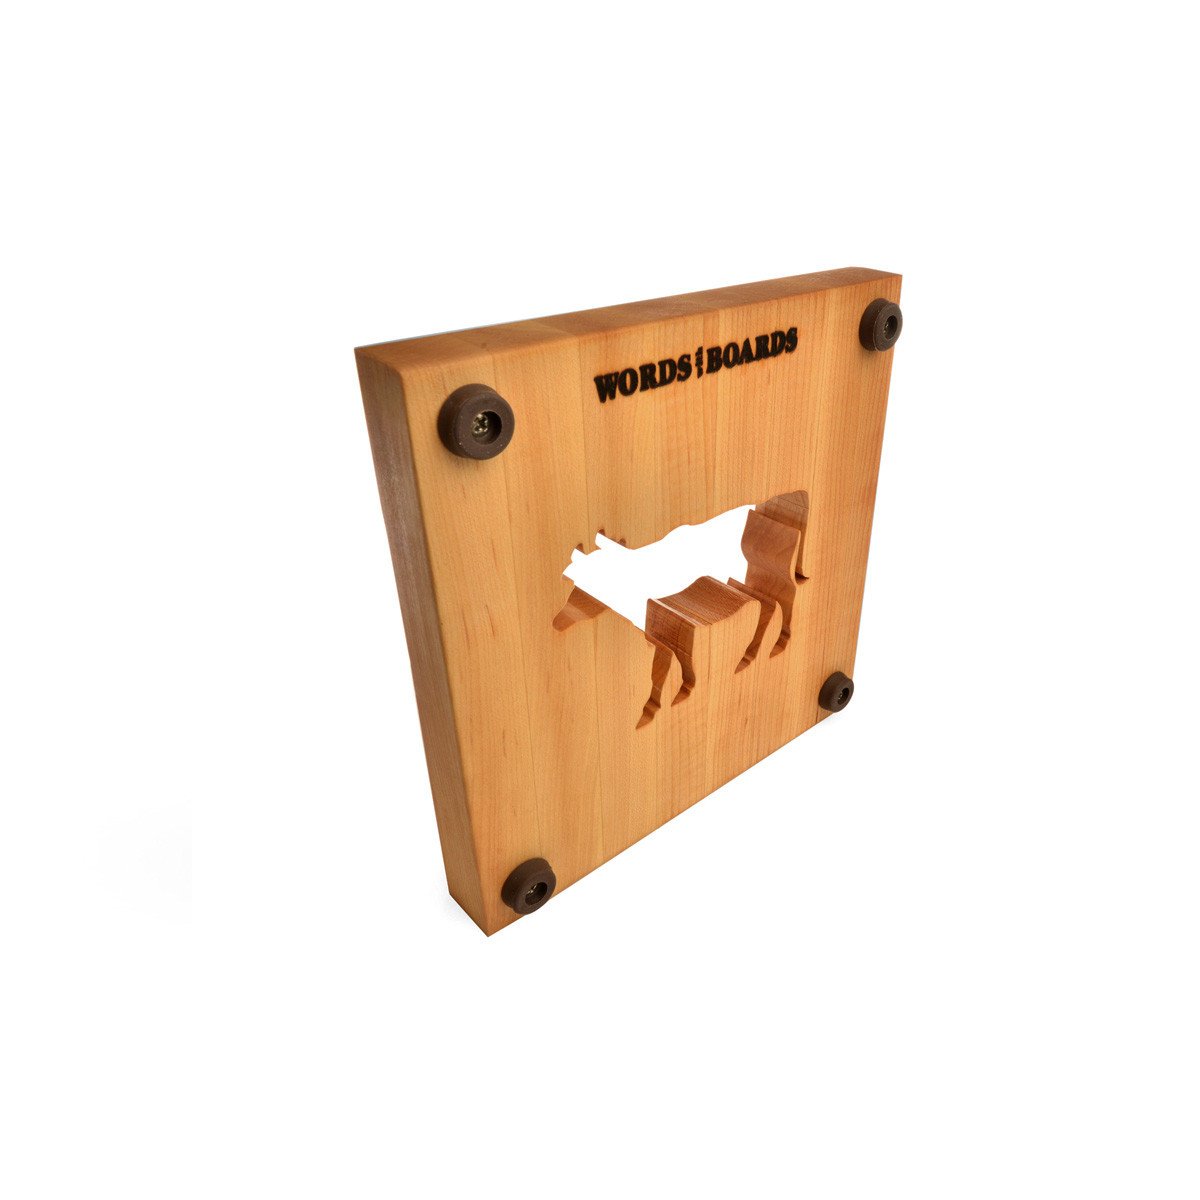 TRIVET - CALYPSO THE COW - wooden trivets - Words with Boards
 - 1